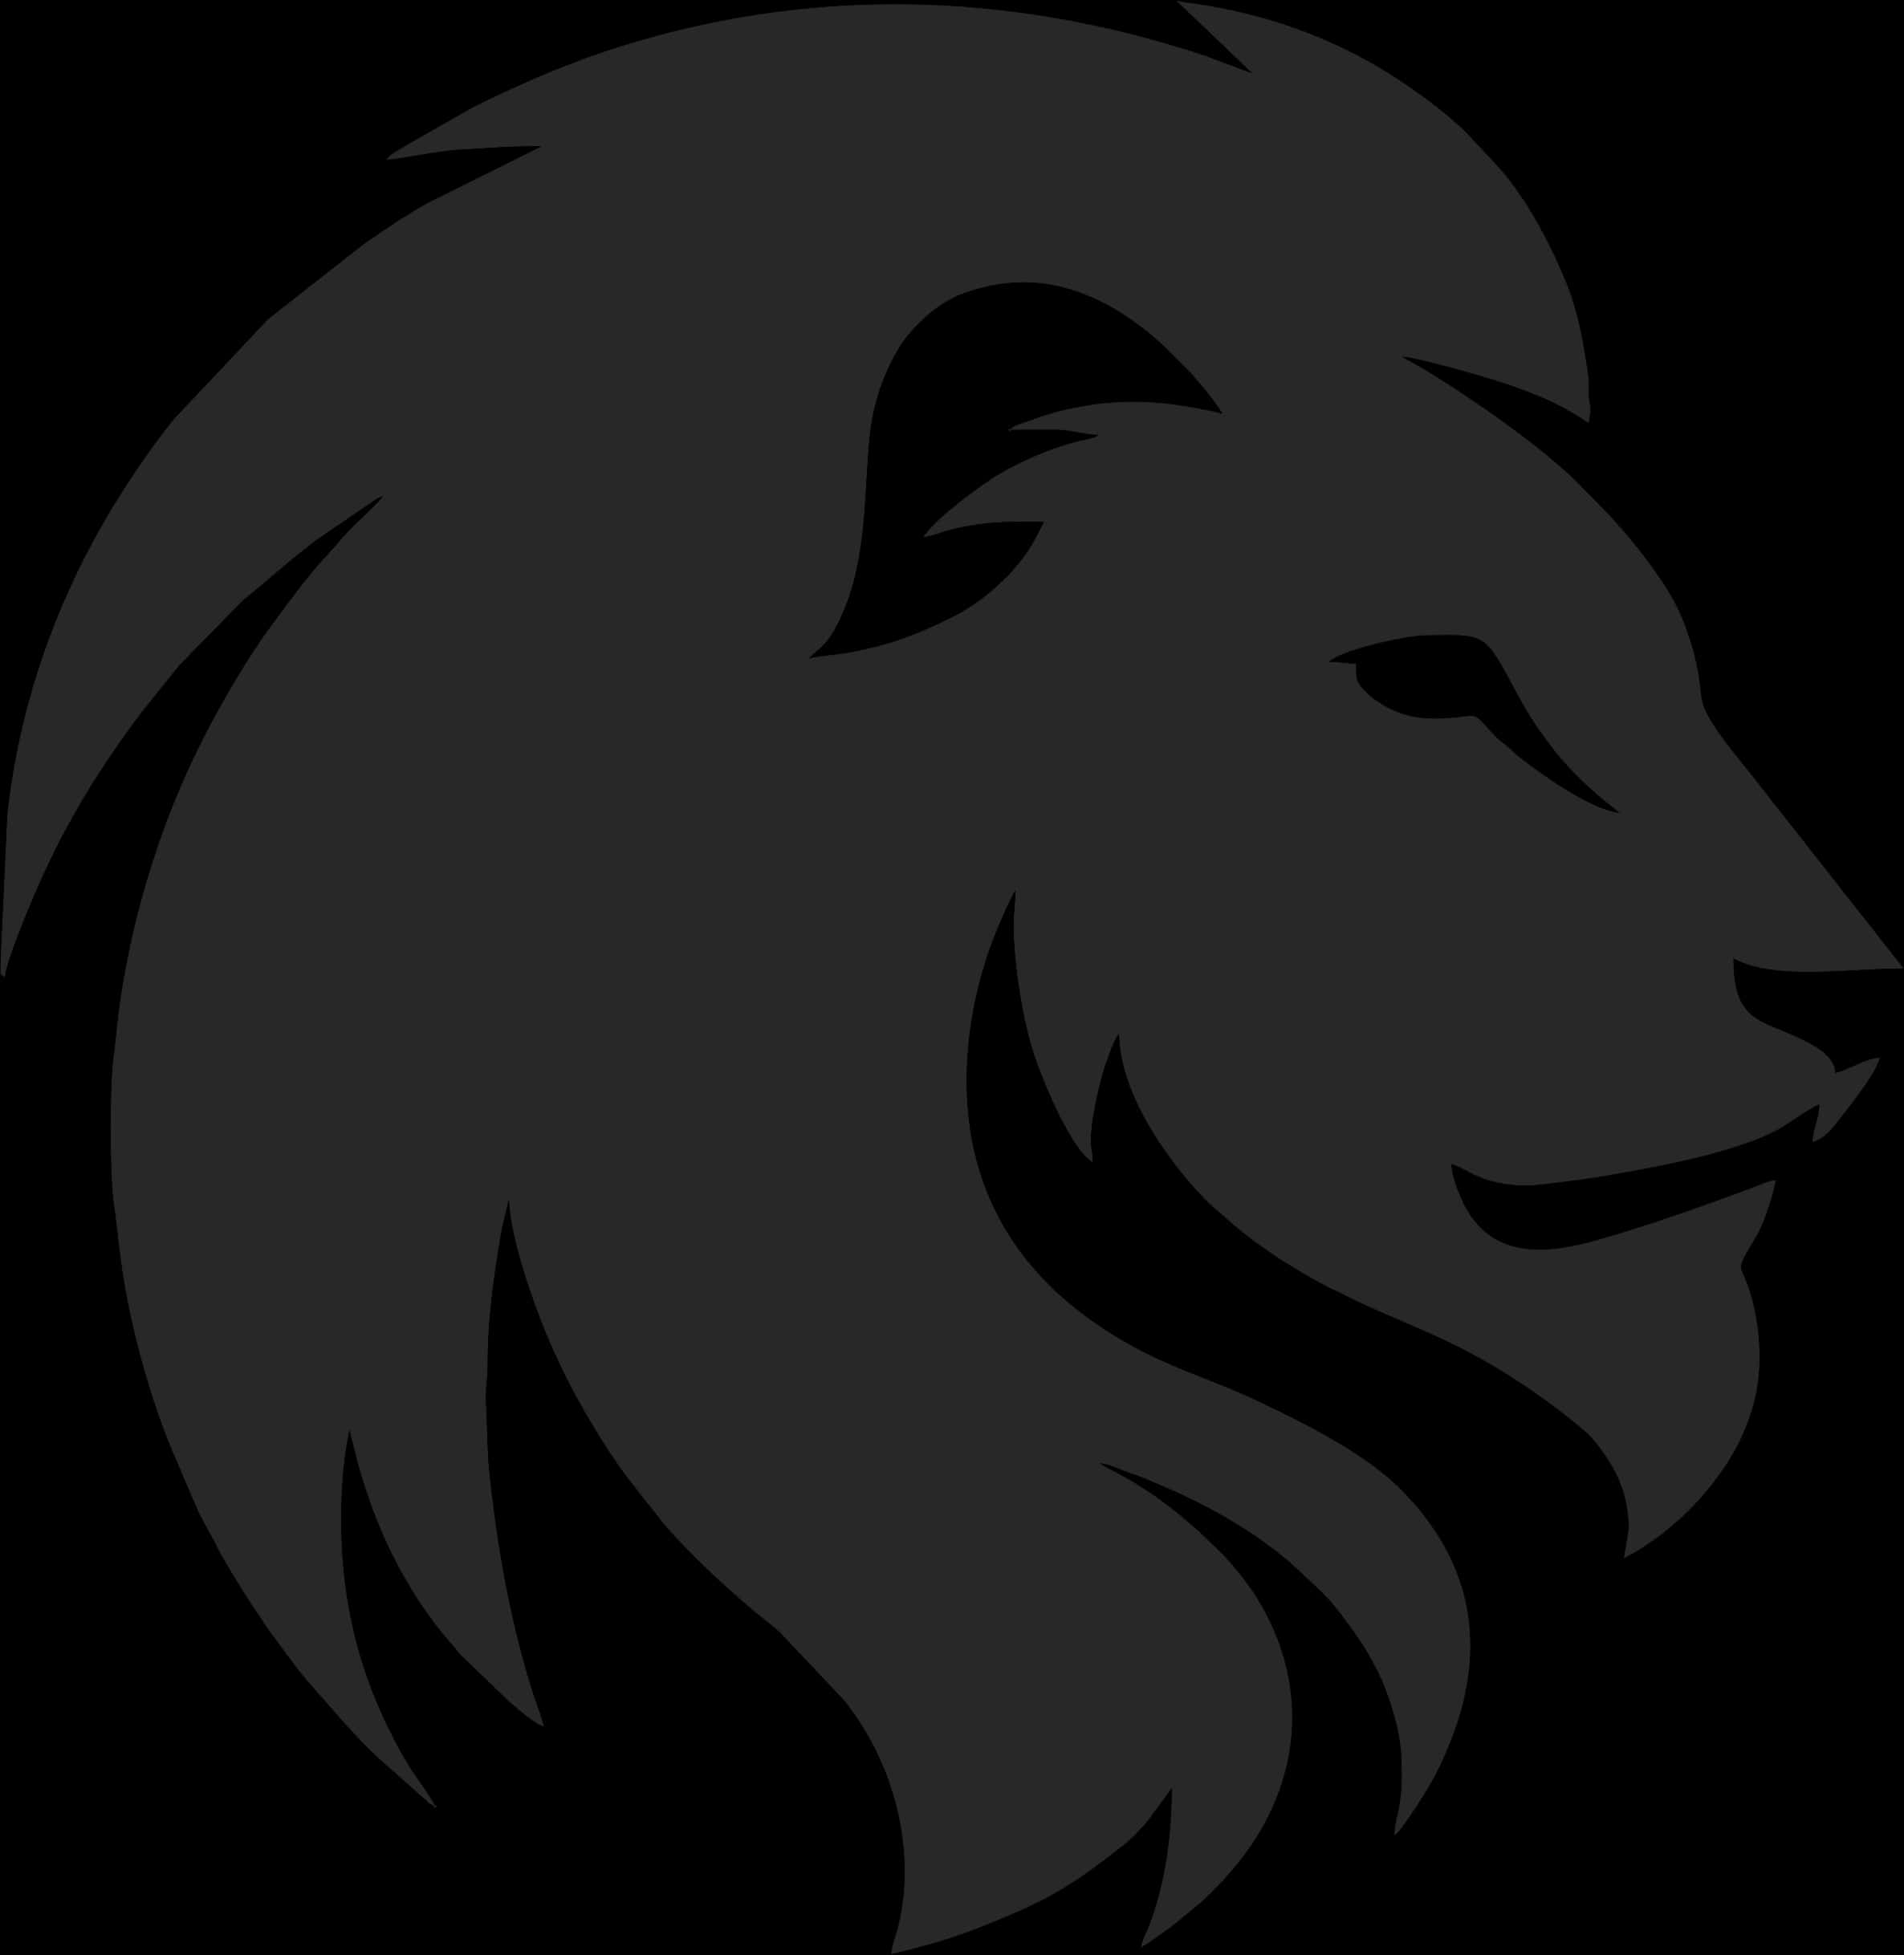 Stylized Lion Silhouette Graphic PNG